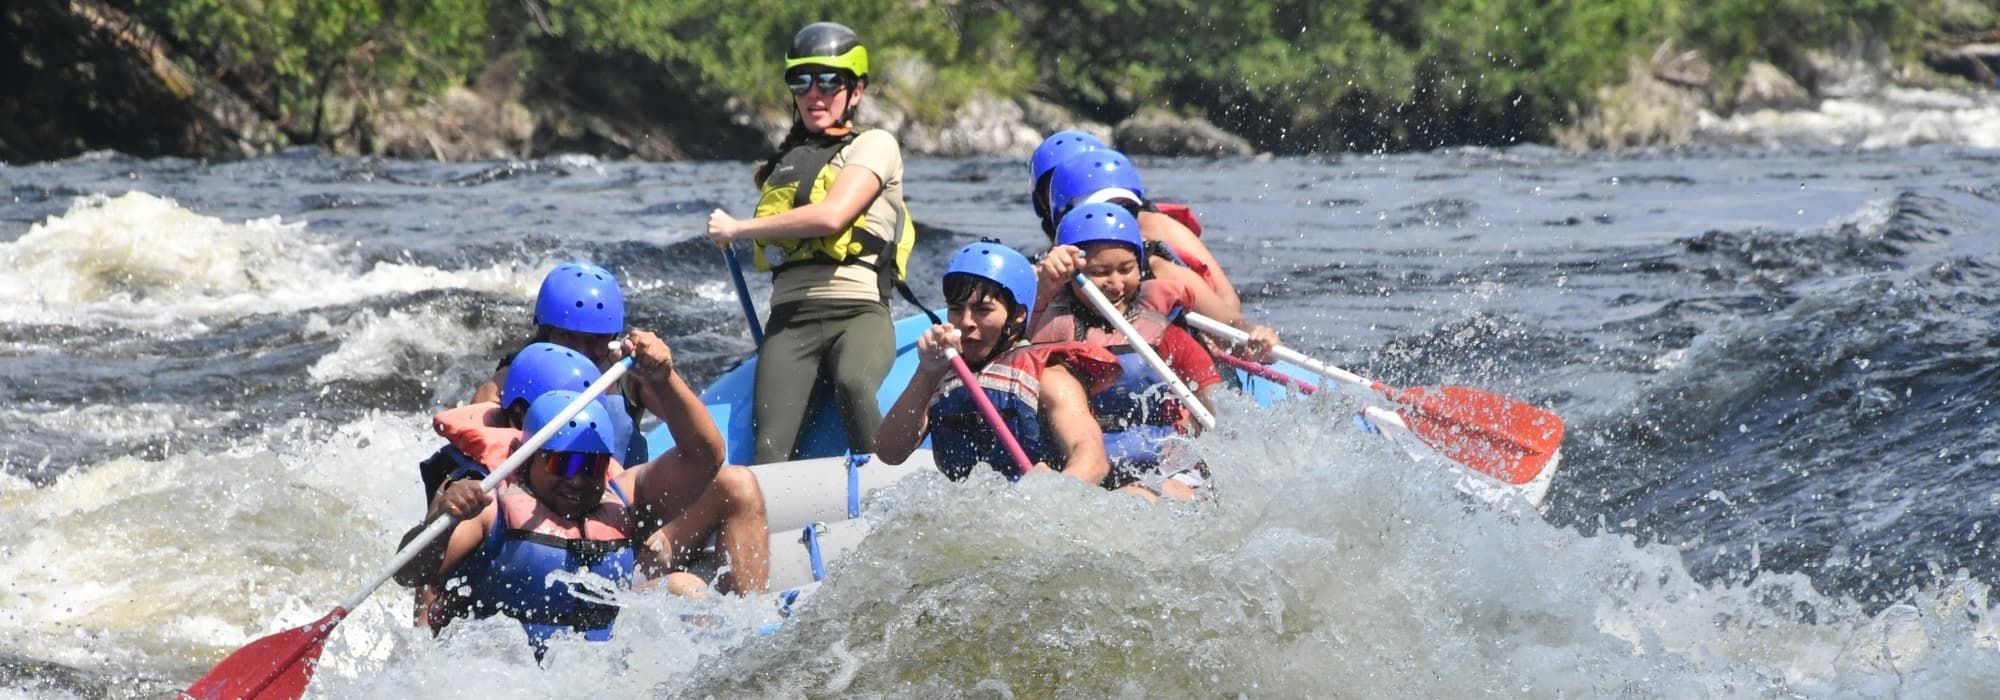 Whitewater rafting on the Dead River